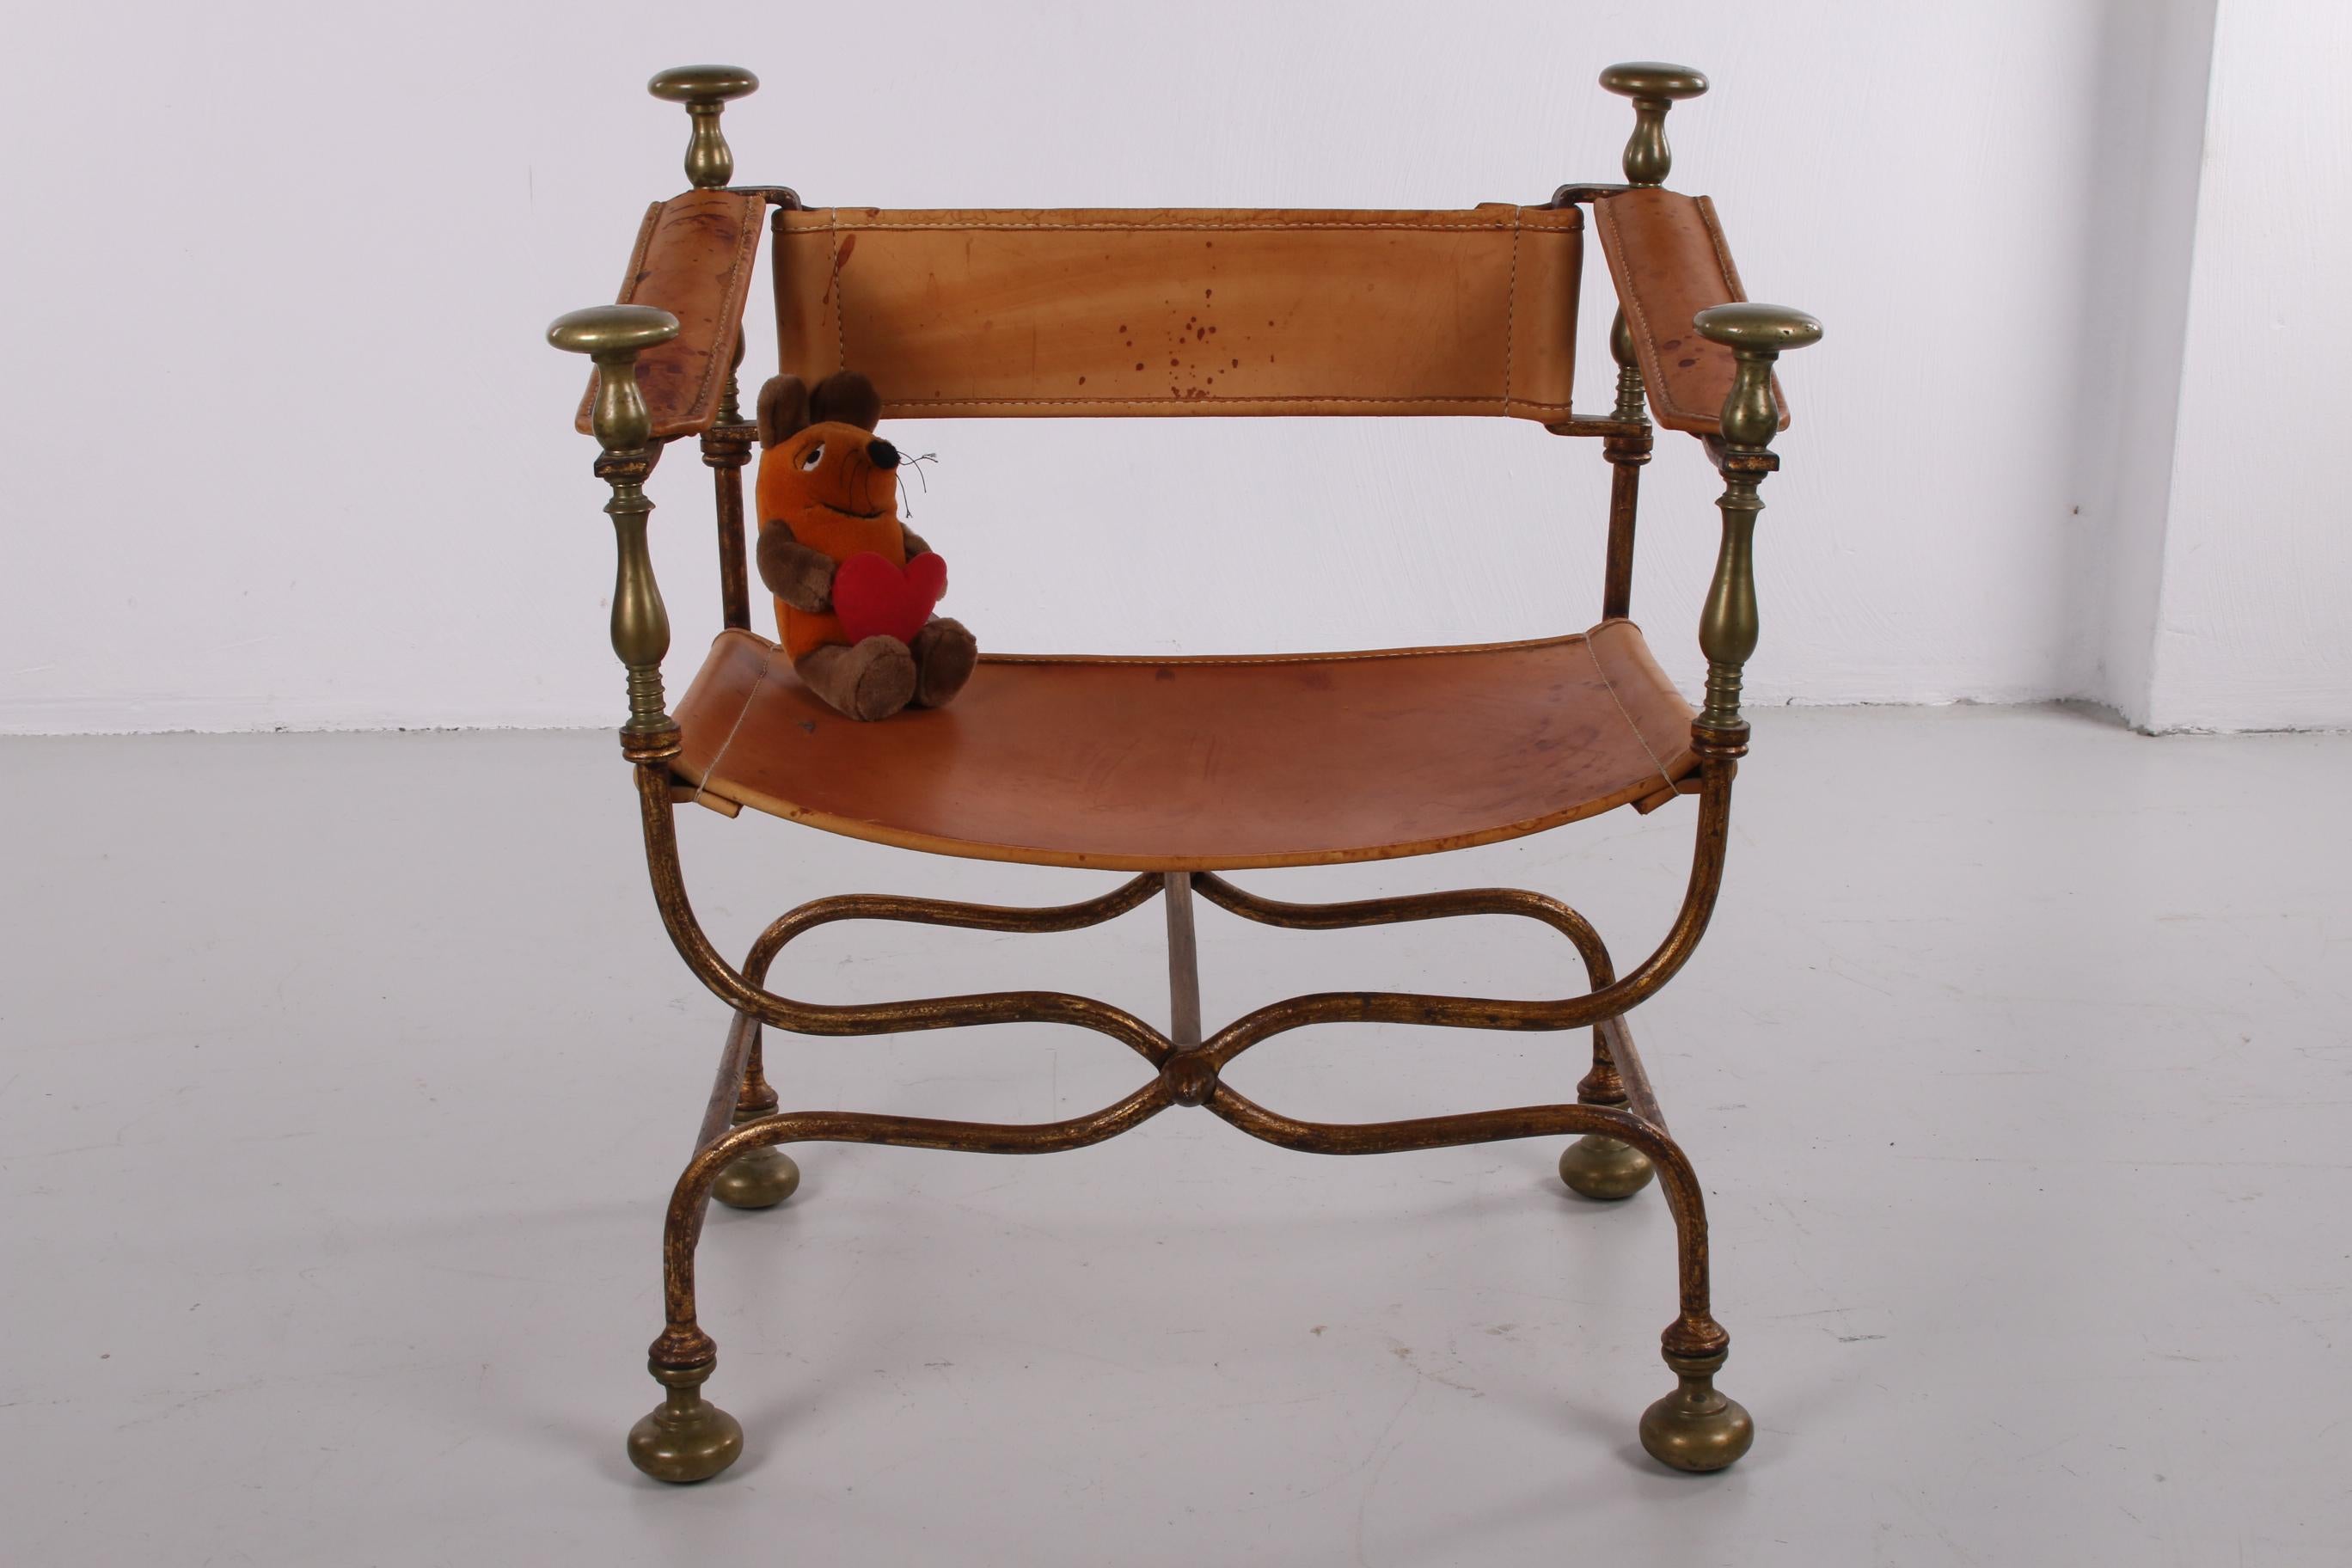 Beautiful chair Italian Savonarola Dante chair. 
Features a bronze scissor-style frame that folds into Campaign style with brass-mounted end pieces and feet. 
The seat, back and arms are covered with thick, weathered leather hides with a